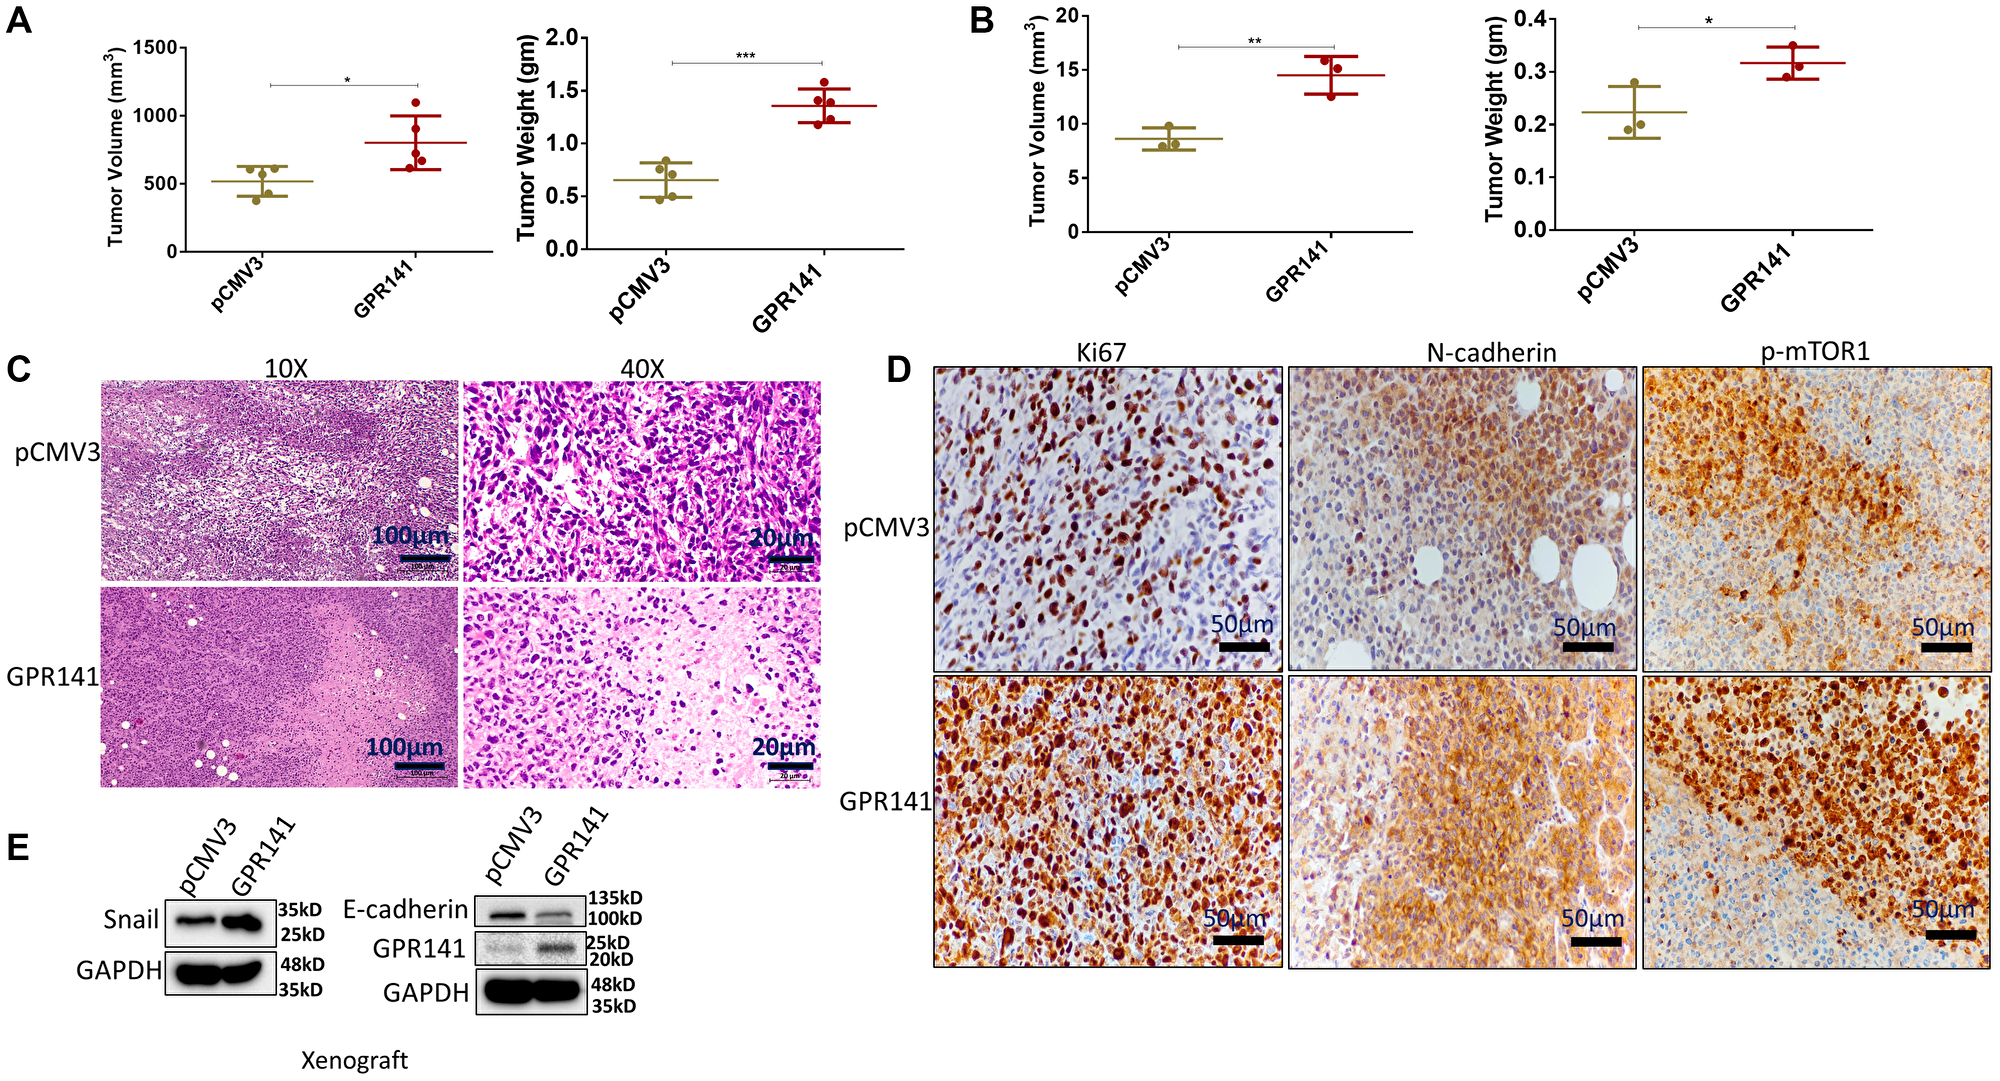 GPR141 overexpression in breast cancer cells increases their propensity to form tumors in female NOD SCID mouse and chick CAM models and modulates the tumor microenvironment in vivo.